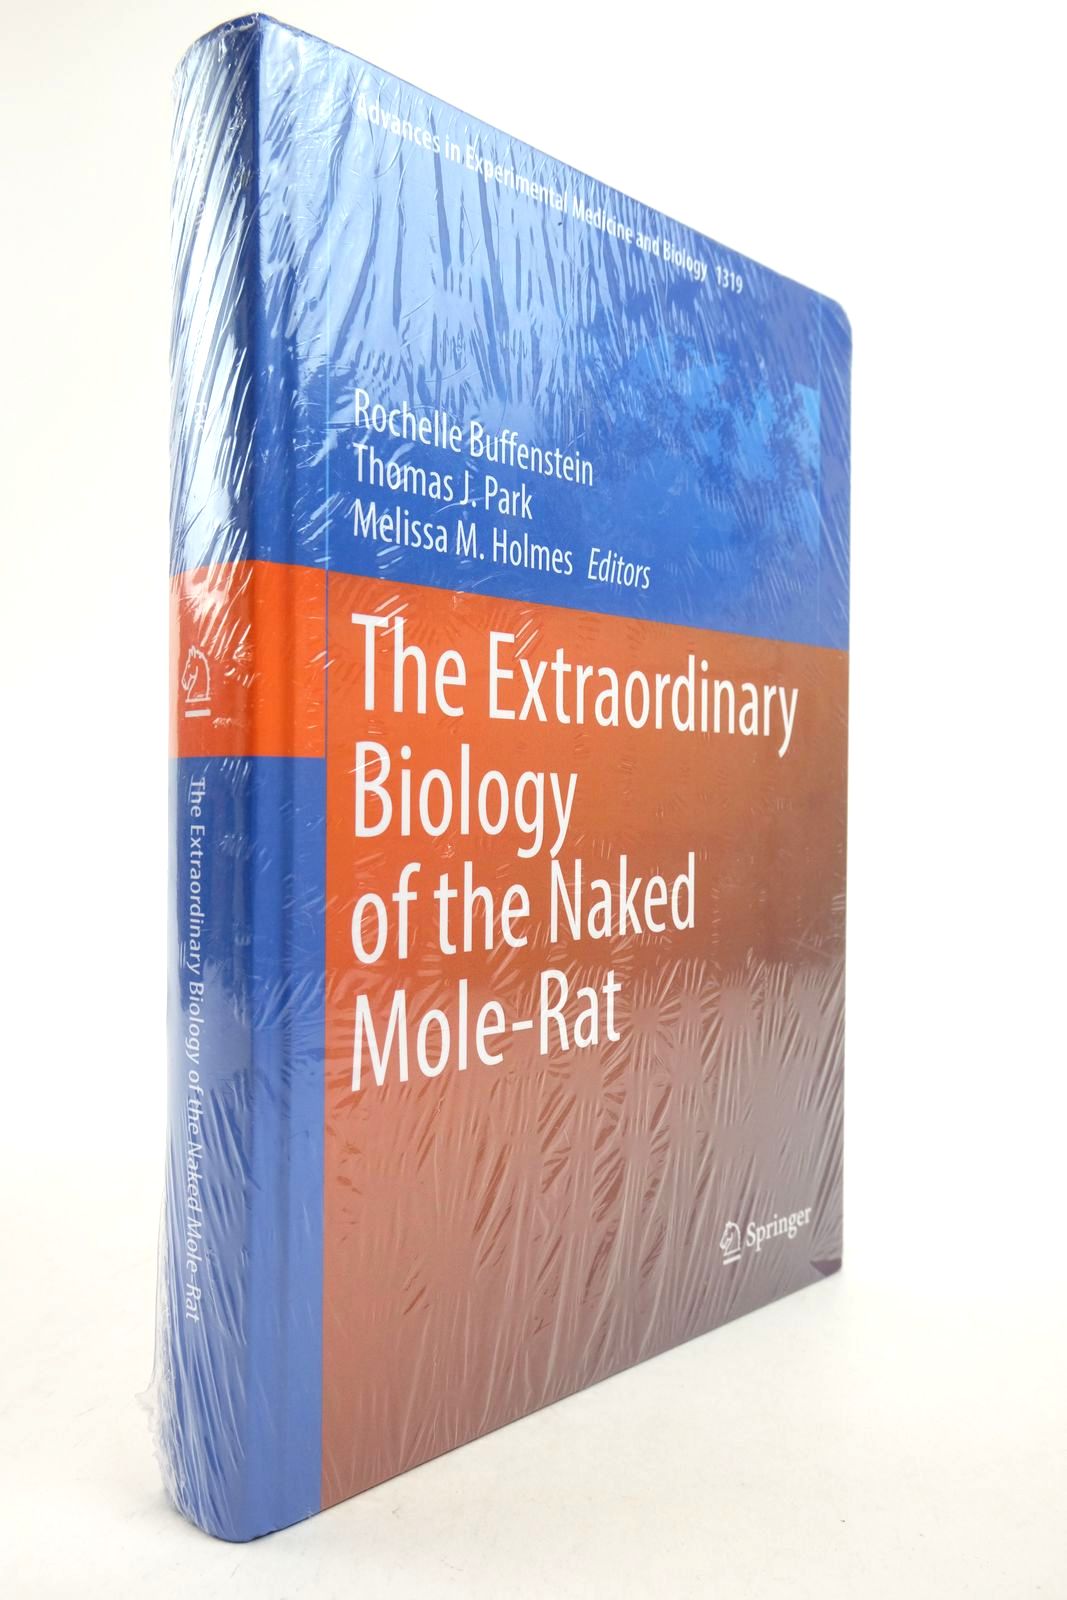 Photo of THE EXTRAORDINARY BIOLOGY OF THE NAKED MOLE-RAT written by Buffenstein, Rochelle Park, Thomas J. Holmes, Melissa M. published by Springer (STOCK CODE: 2140381)  for sale by Stella & Rose's Books